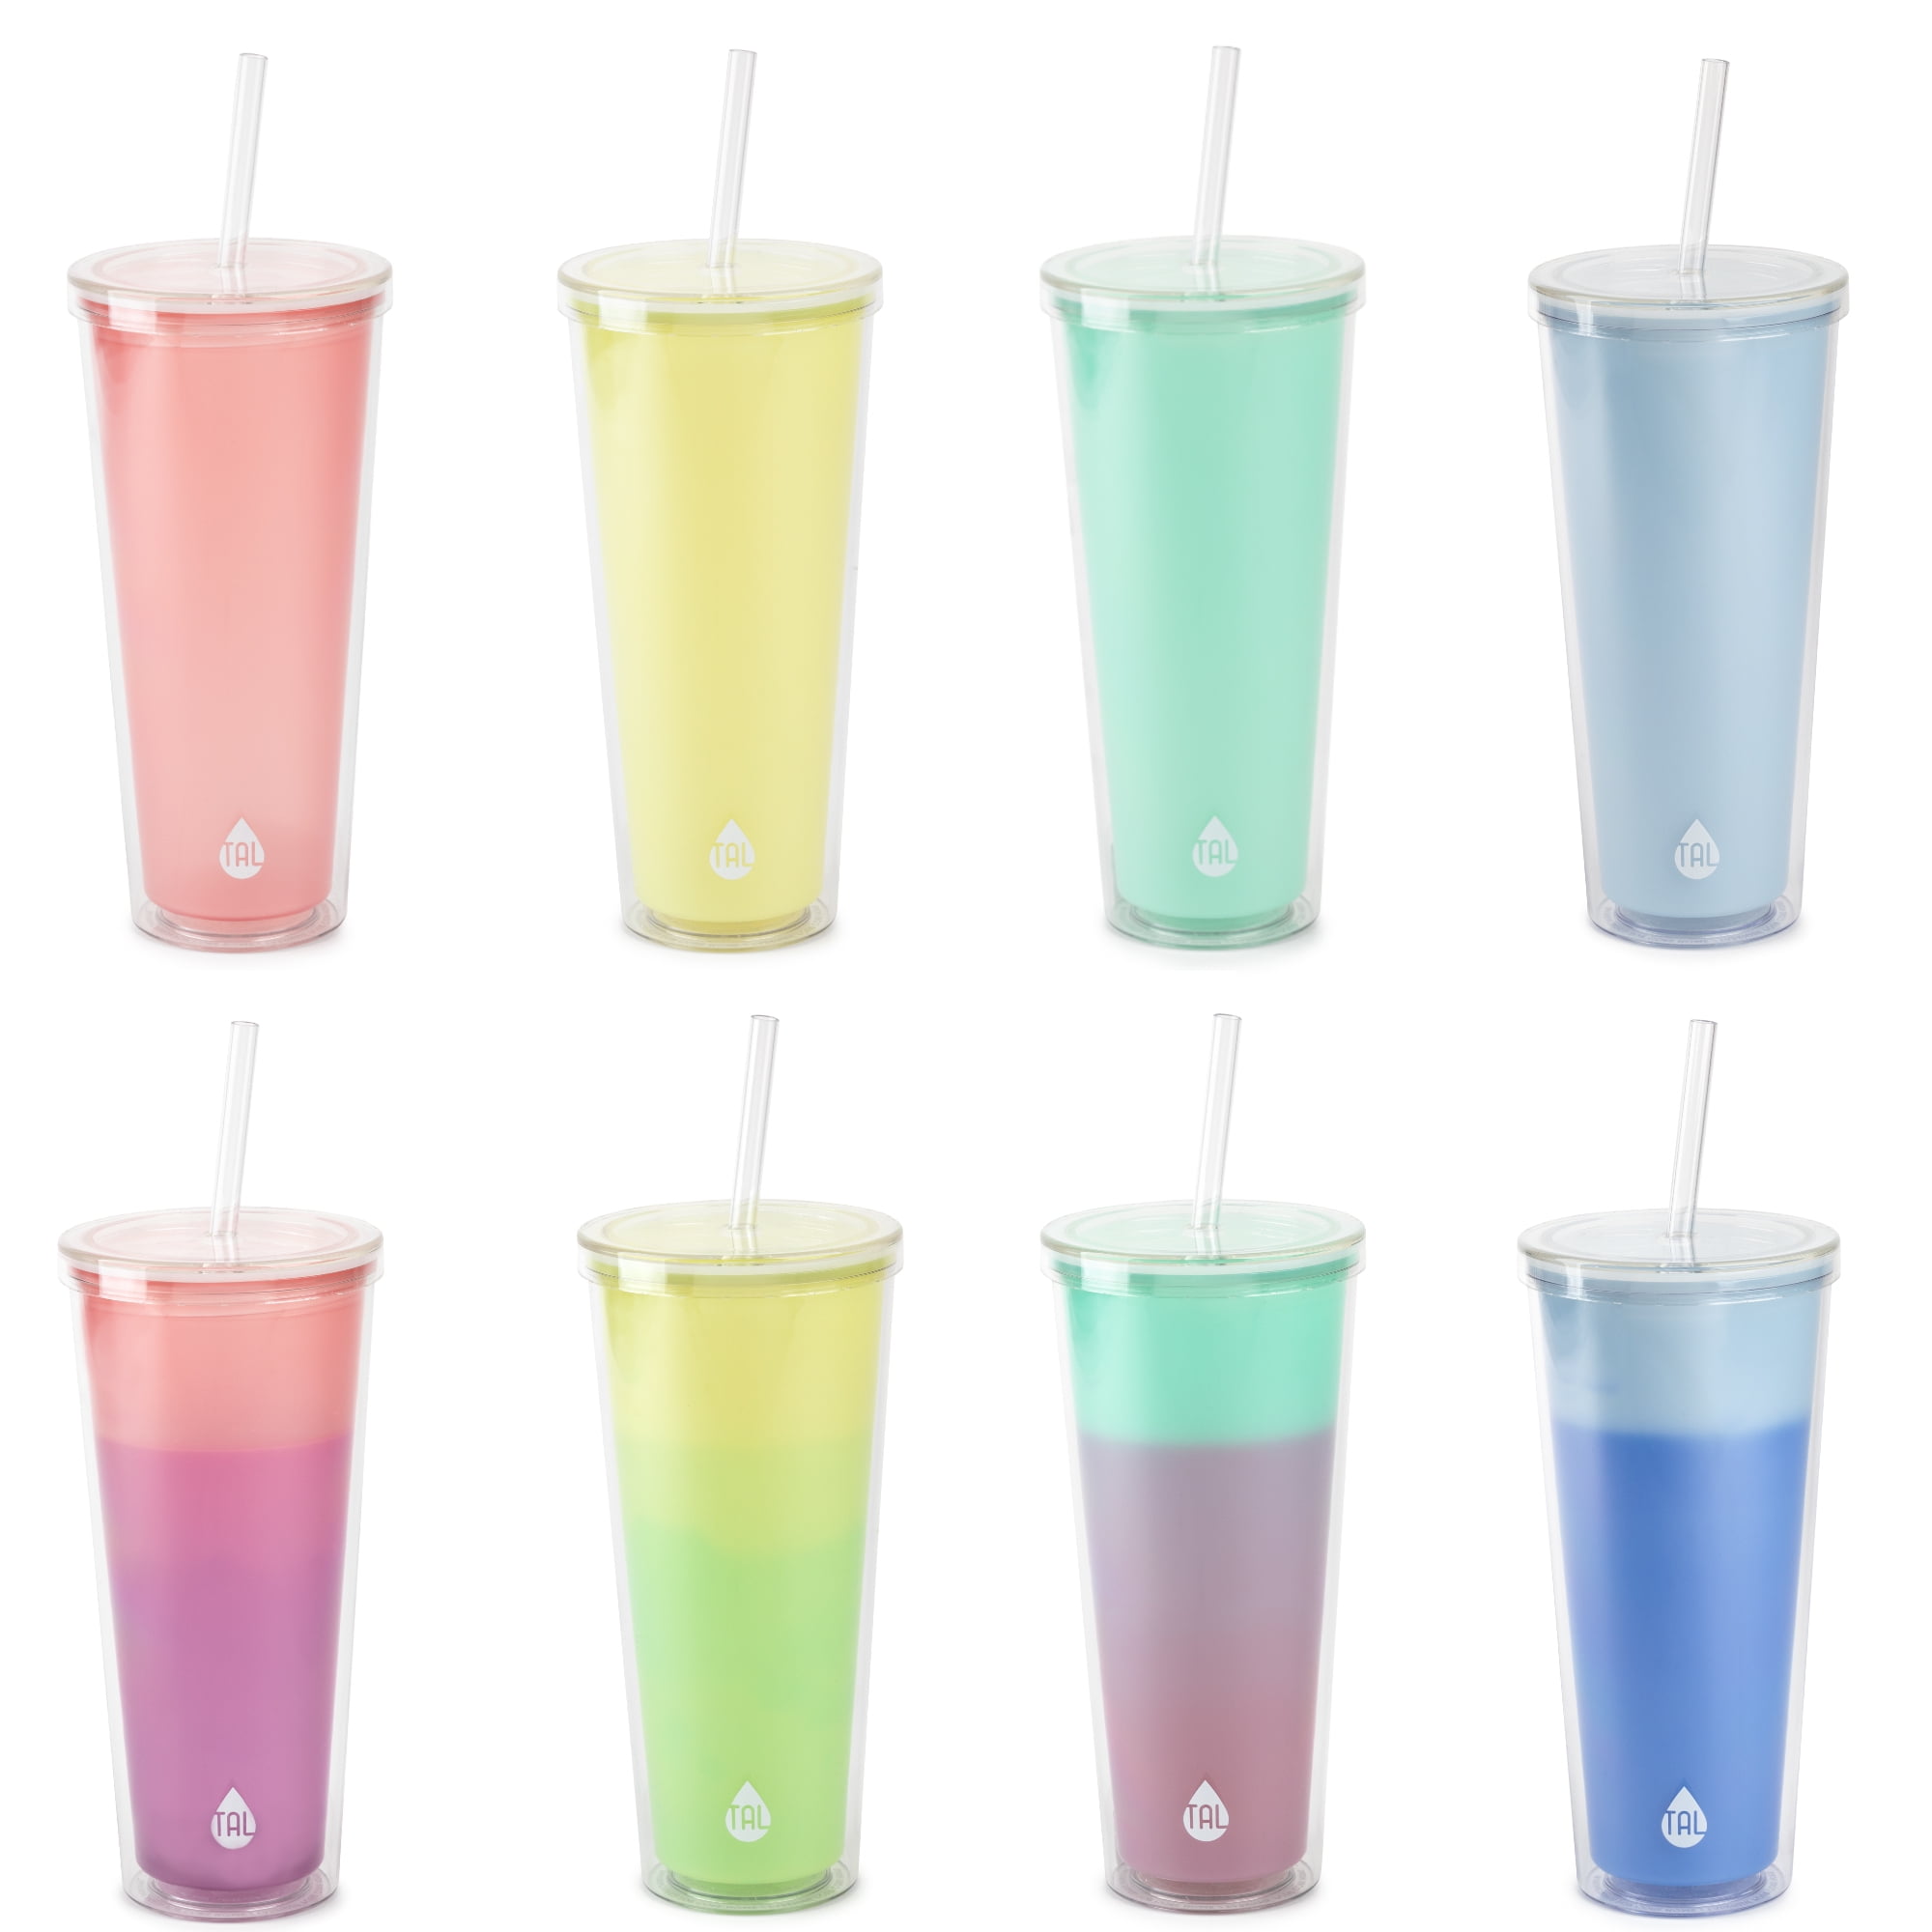  TAL Mutlicolor Reusable Color Changing Tumbler & Straw